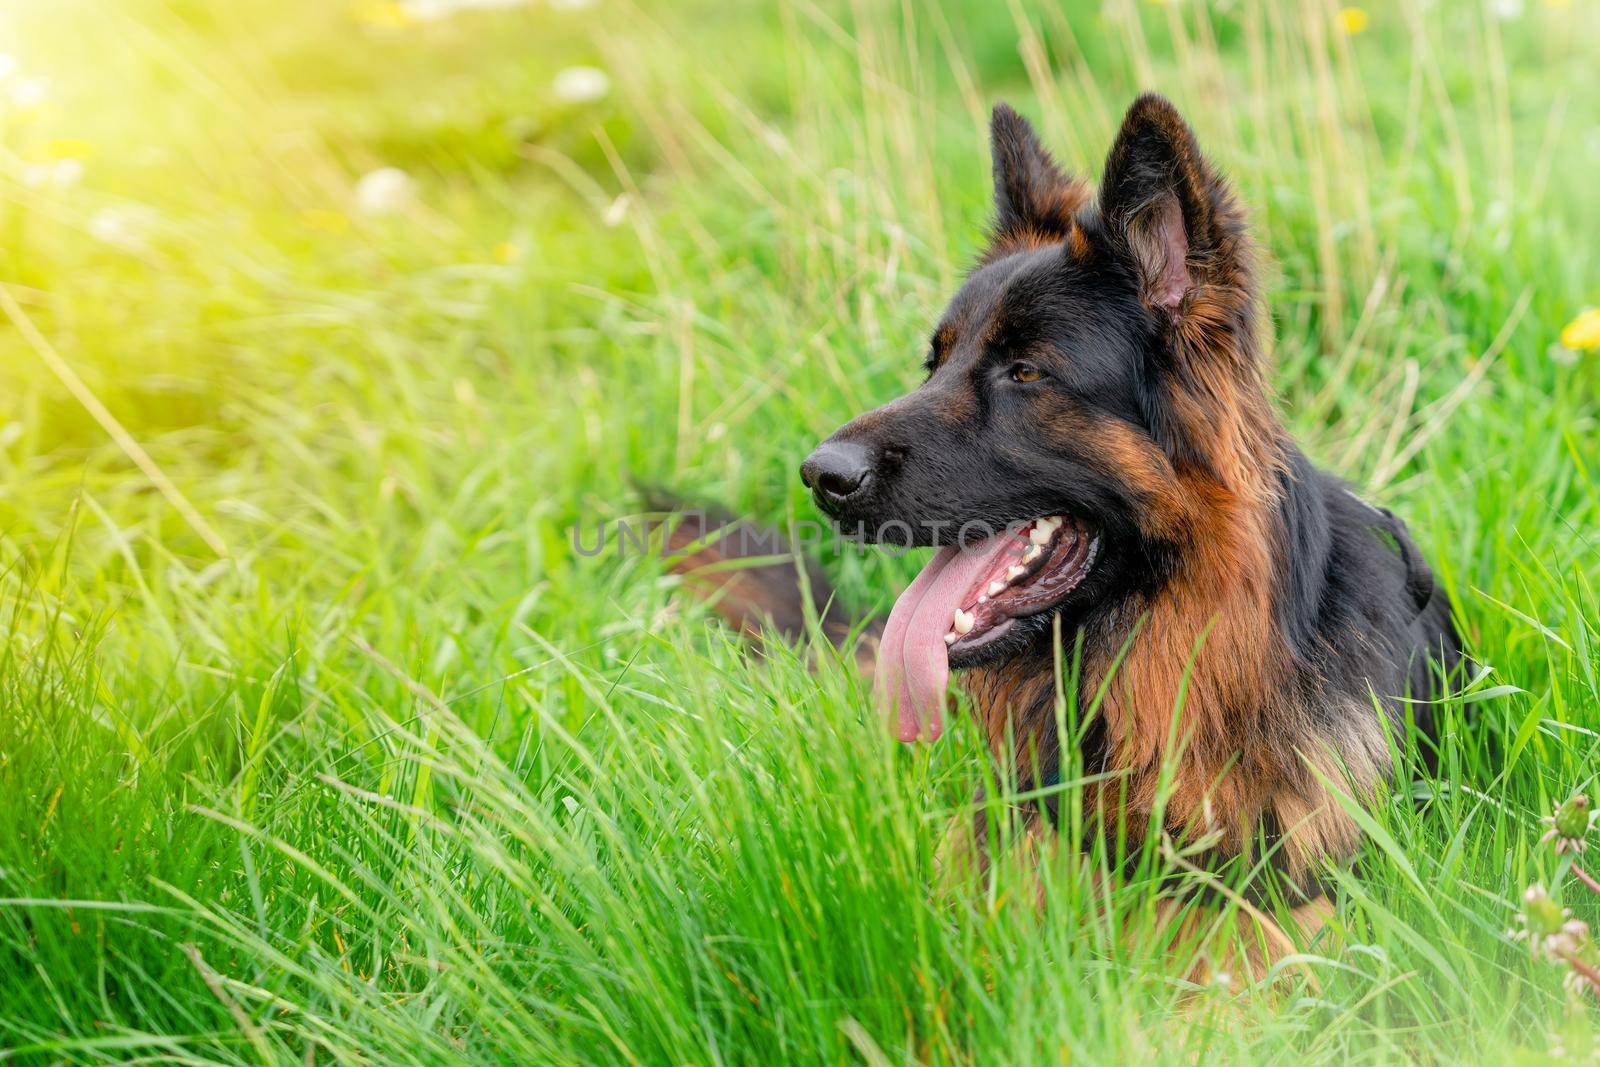 German shepherd dog in harness out for a walk lying on the grass in sunny summer day by Iryna_Melnyk